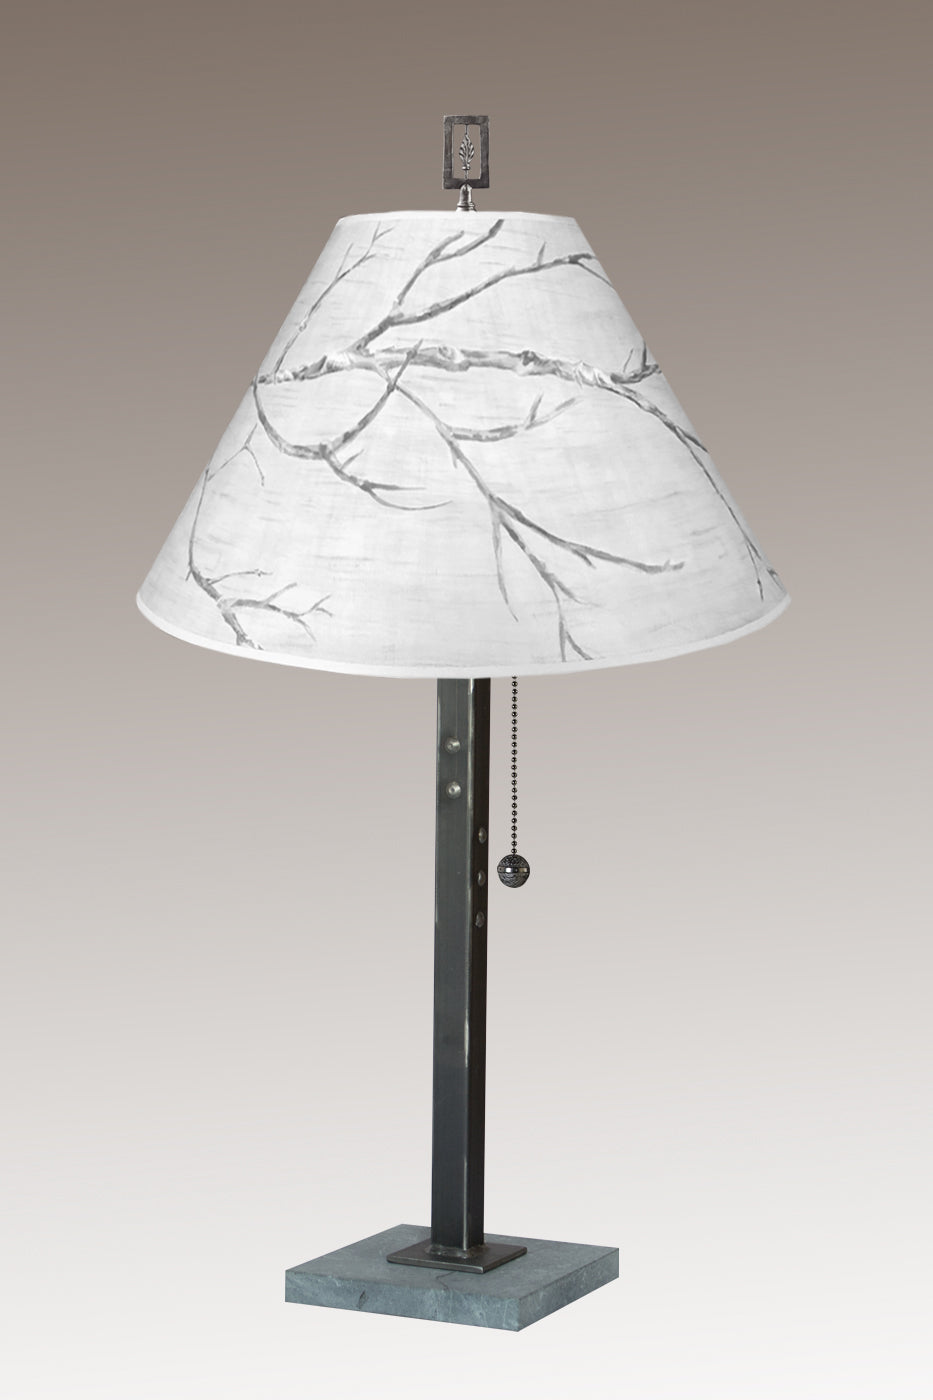 Janna Ugone &amp; Co Table Lamps Steel Table Lamp with Medium Conical Shade in Sweeping Branch